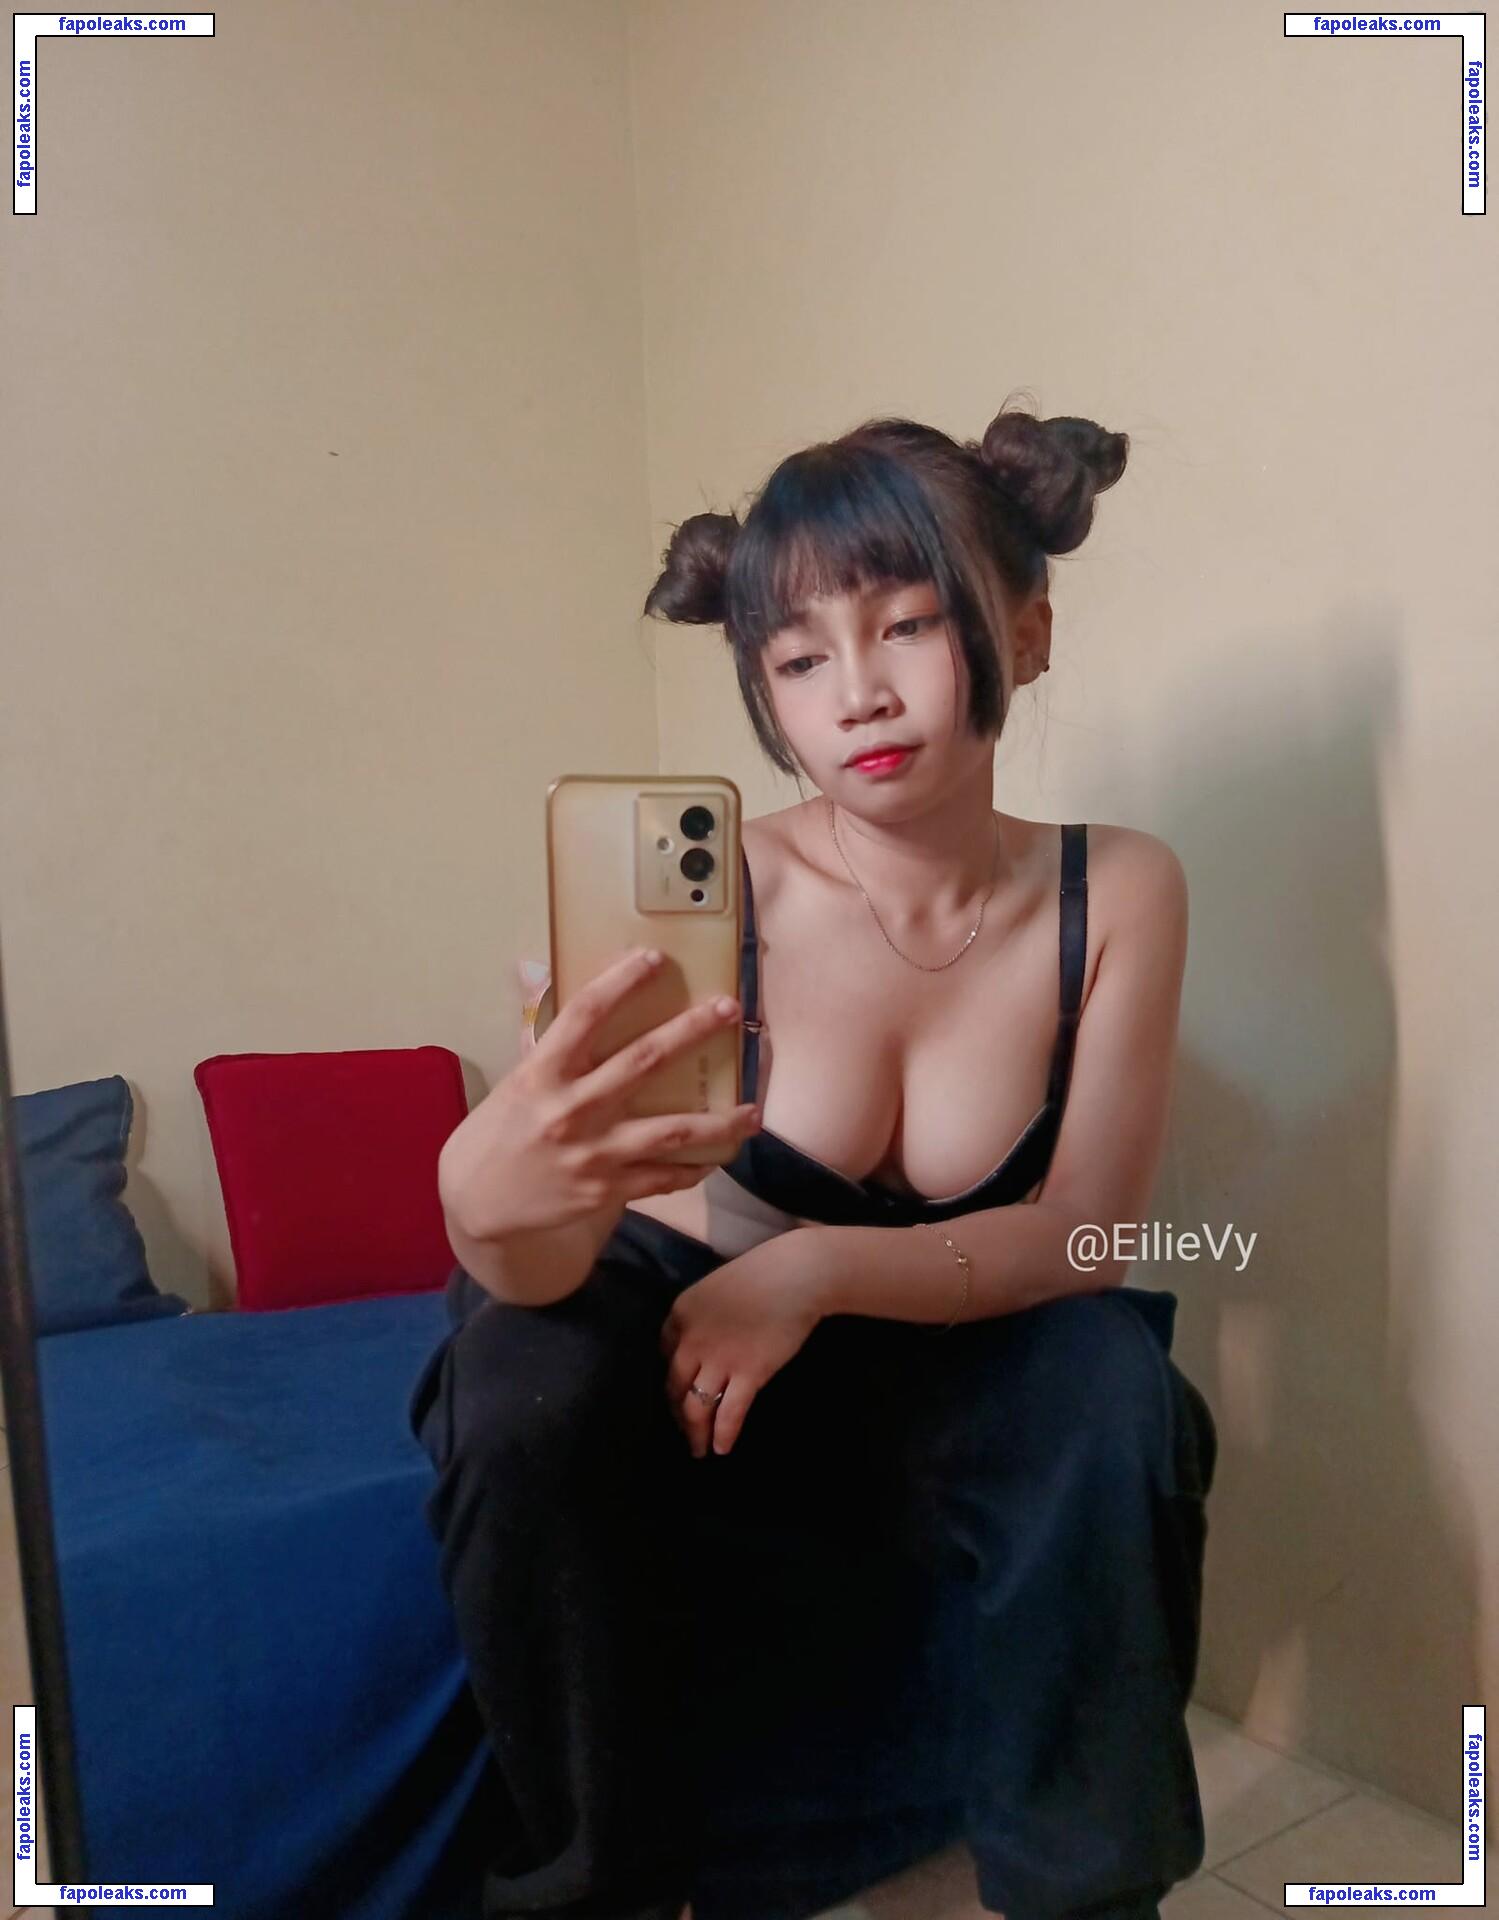 Eilie Vy / eilievy / ellie.vy / ellieloveee0 nude photo #0019 from OnlyFans